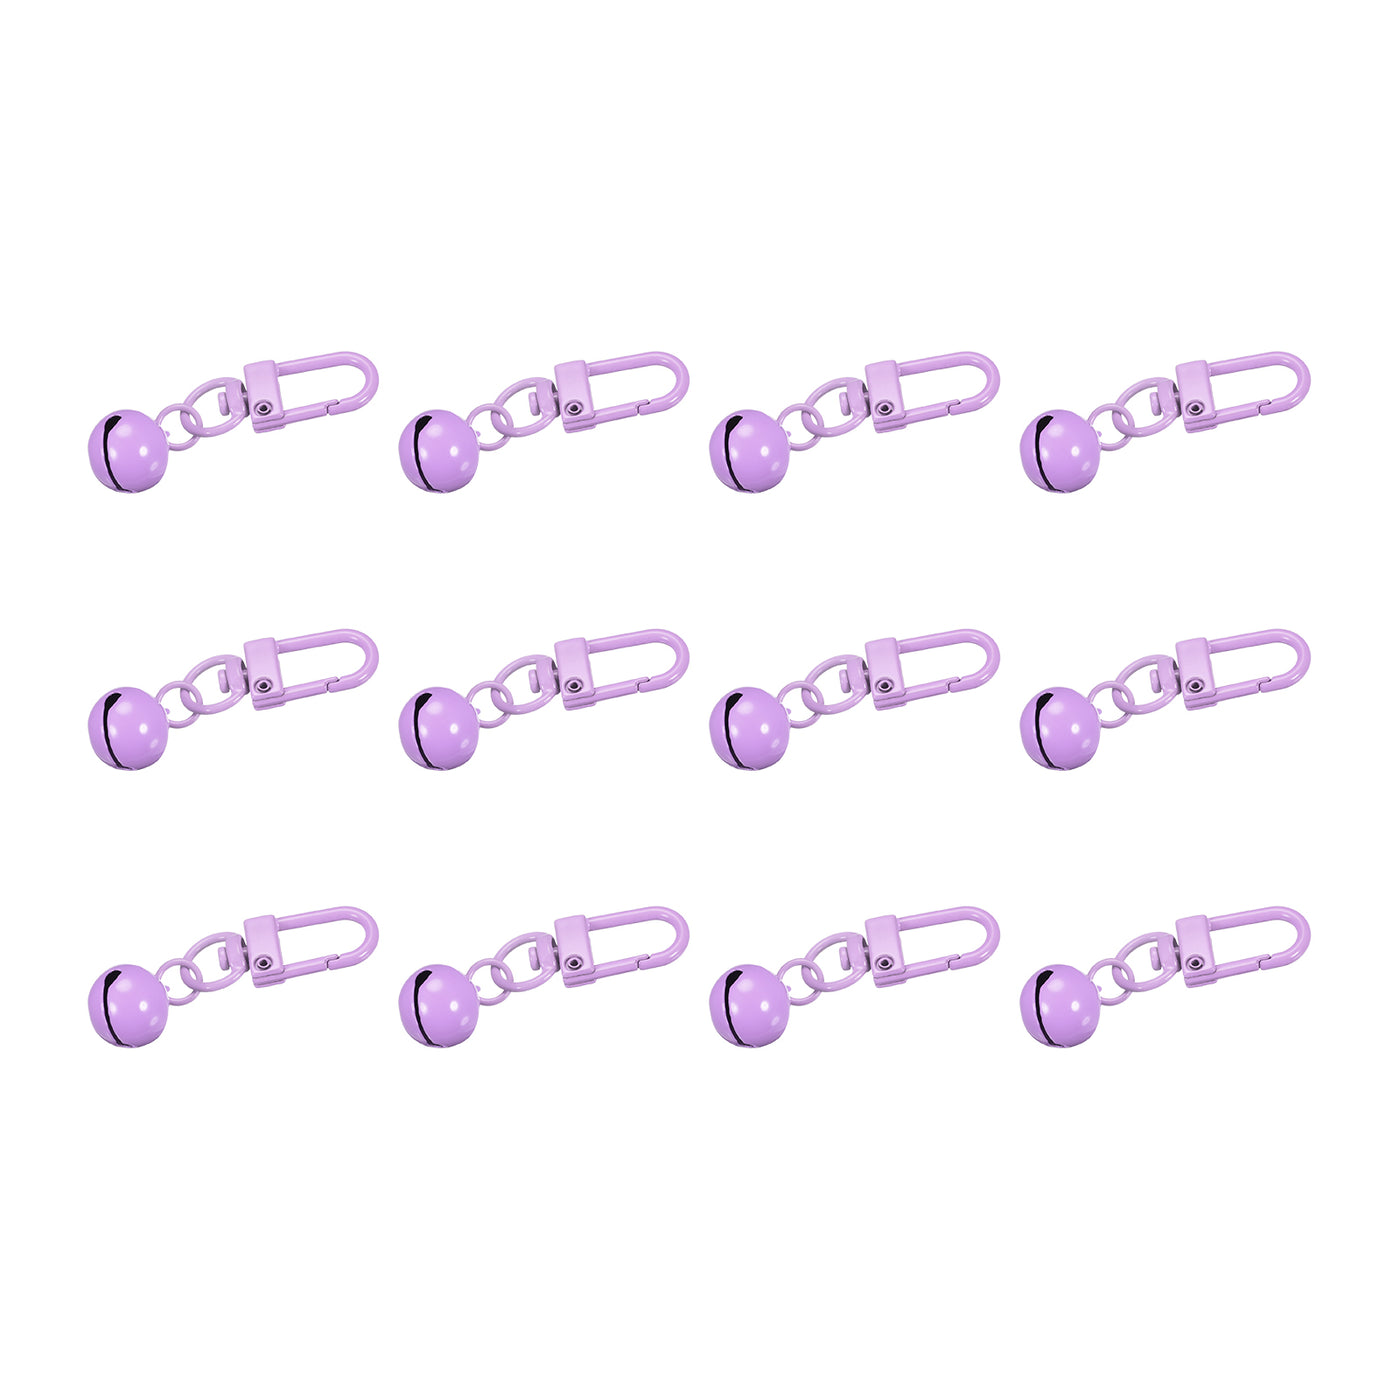 uxcell Uxcell 12Pcs Pet Bells, 13mm/0.51" Dia Purple Bells with Clasps for DIY Crafts